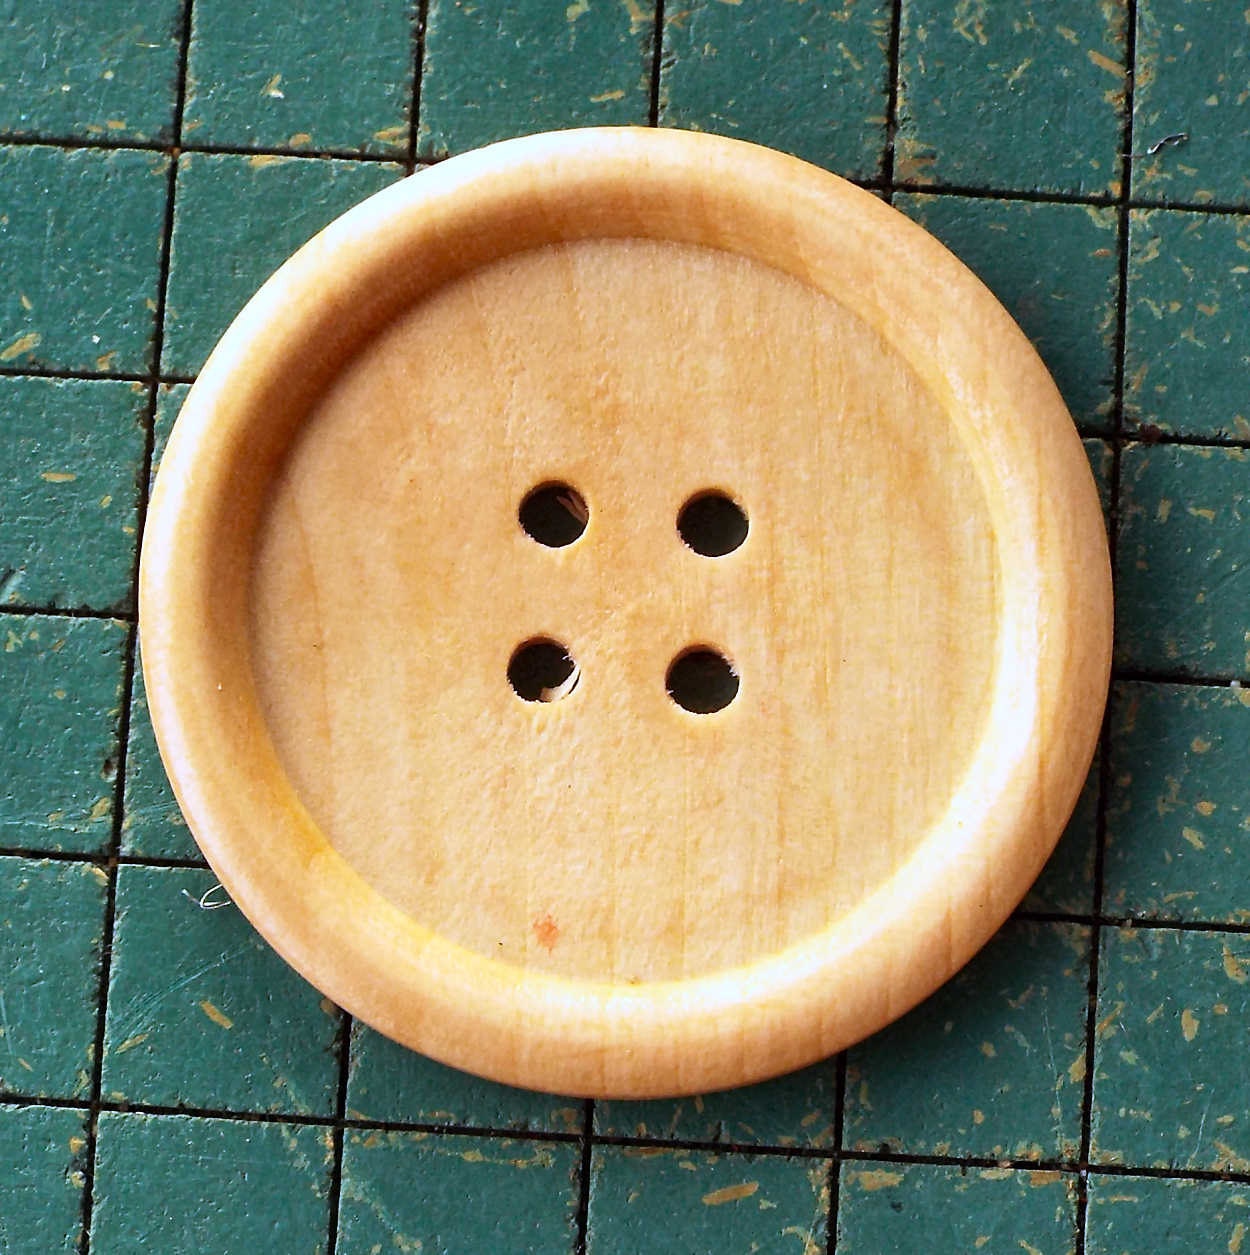 30 Pieces Large Size Wood Buttons 2.36 Inch Round Sewing Button 4 Holes  Large Buttons for Crafts Sewing Large Wooden Buttons for DIY Clothing Bag